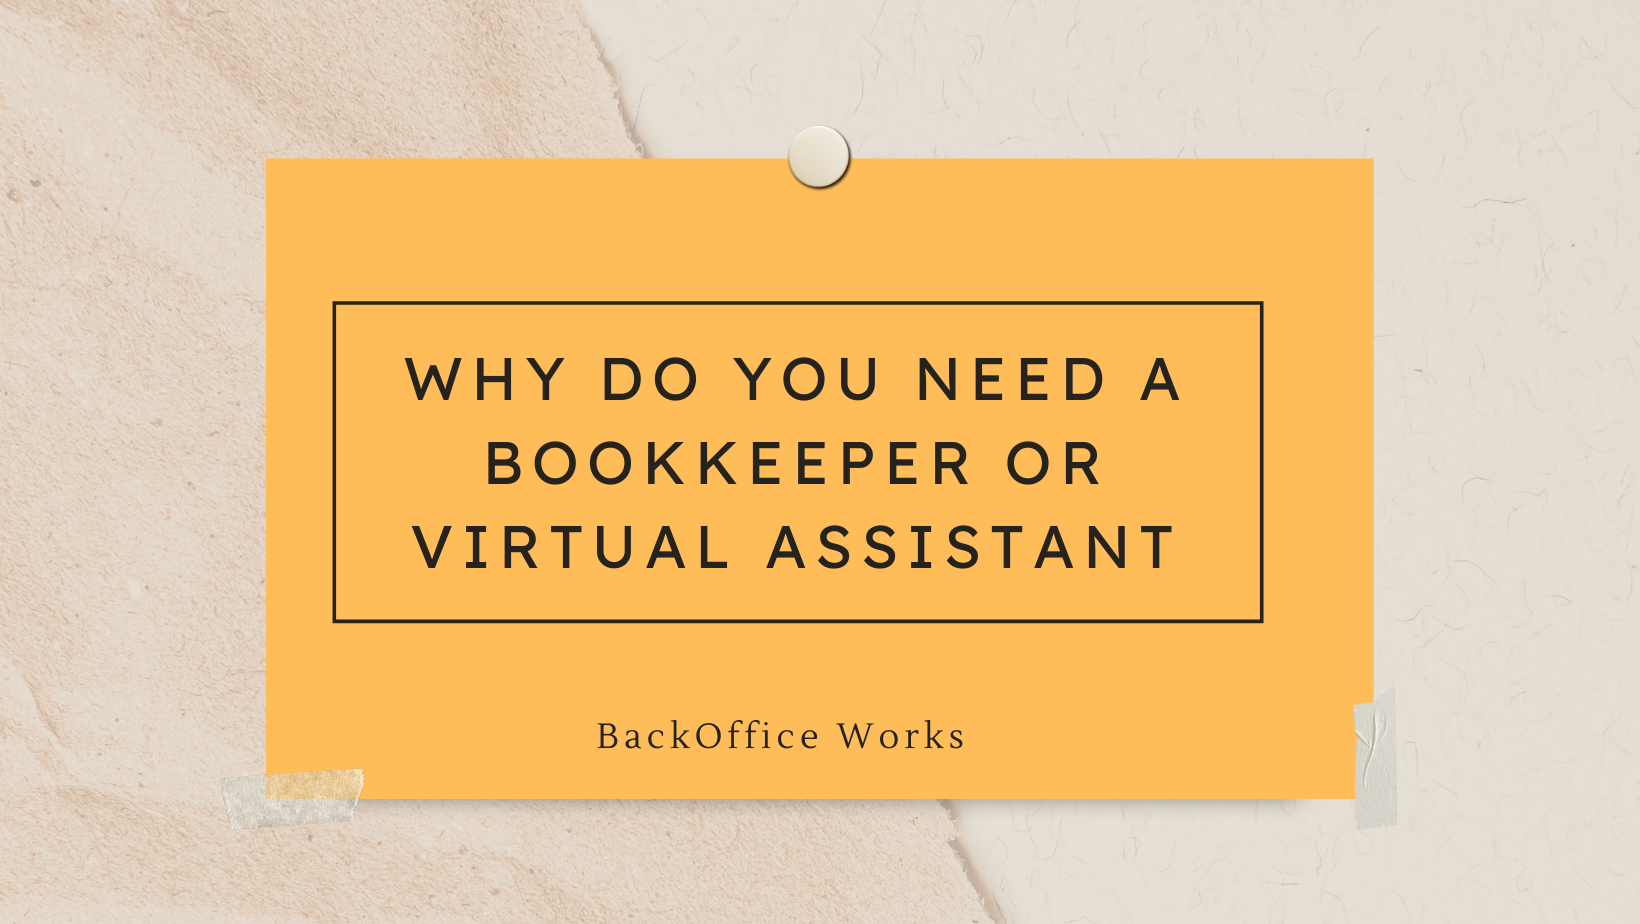 Why do you need a Bookkeeper or Virtual Assistant?